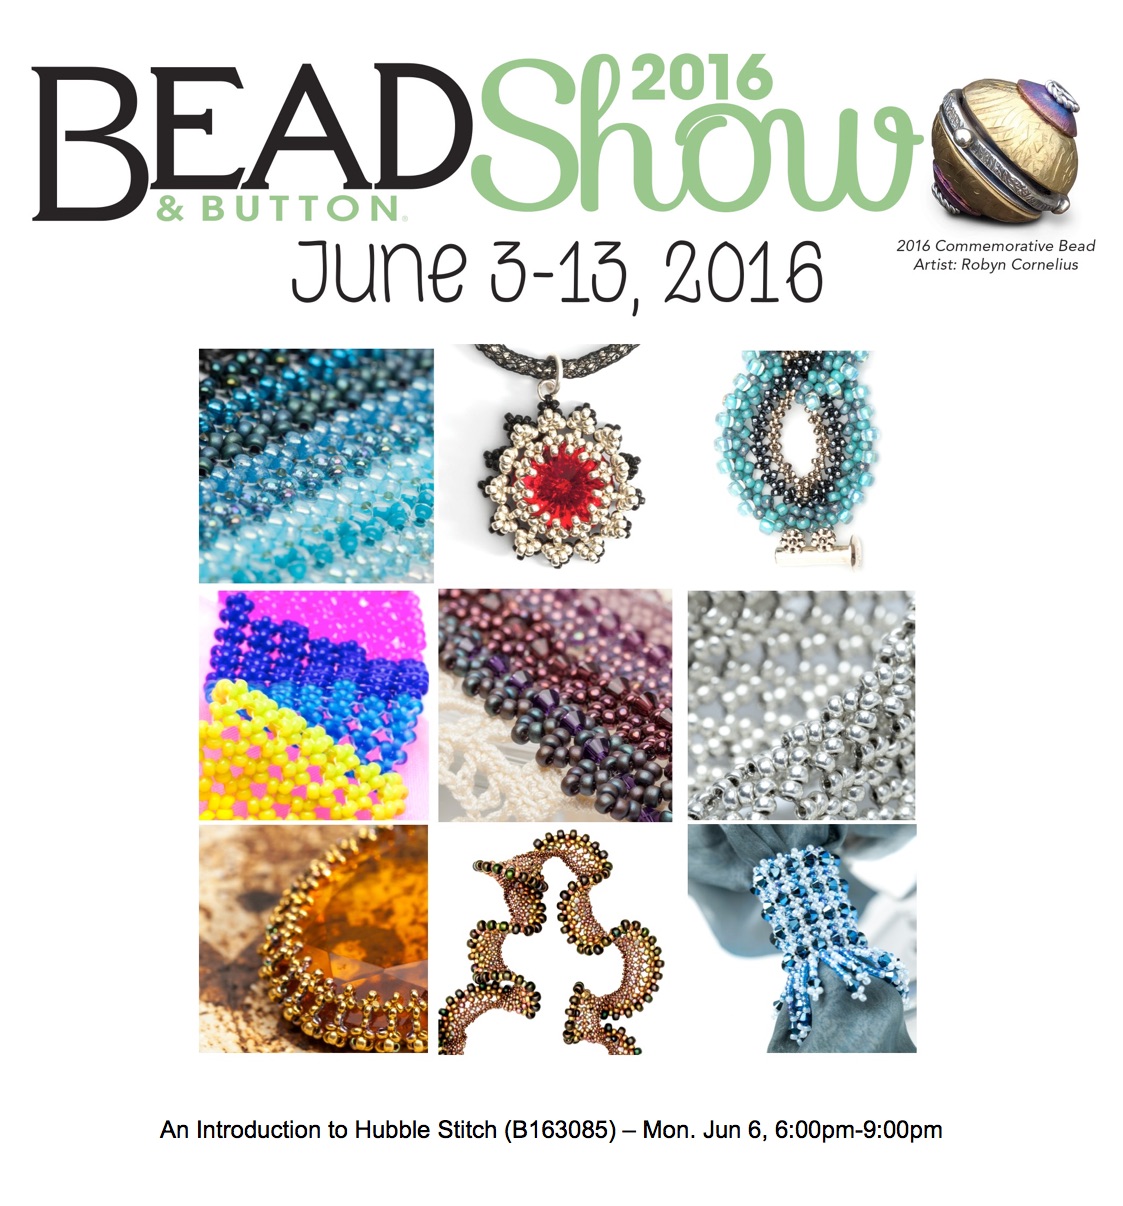 Introduction to Hubble Stitch class at the Bead & Button Show 2016